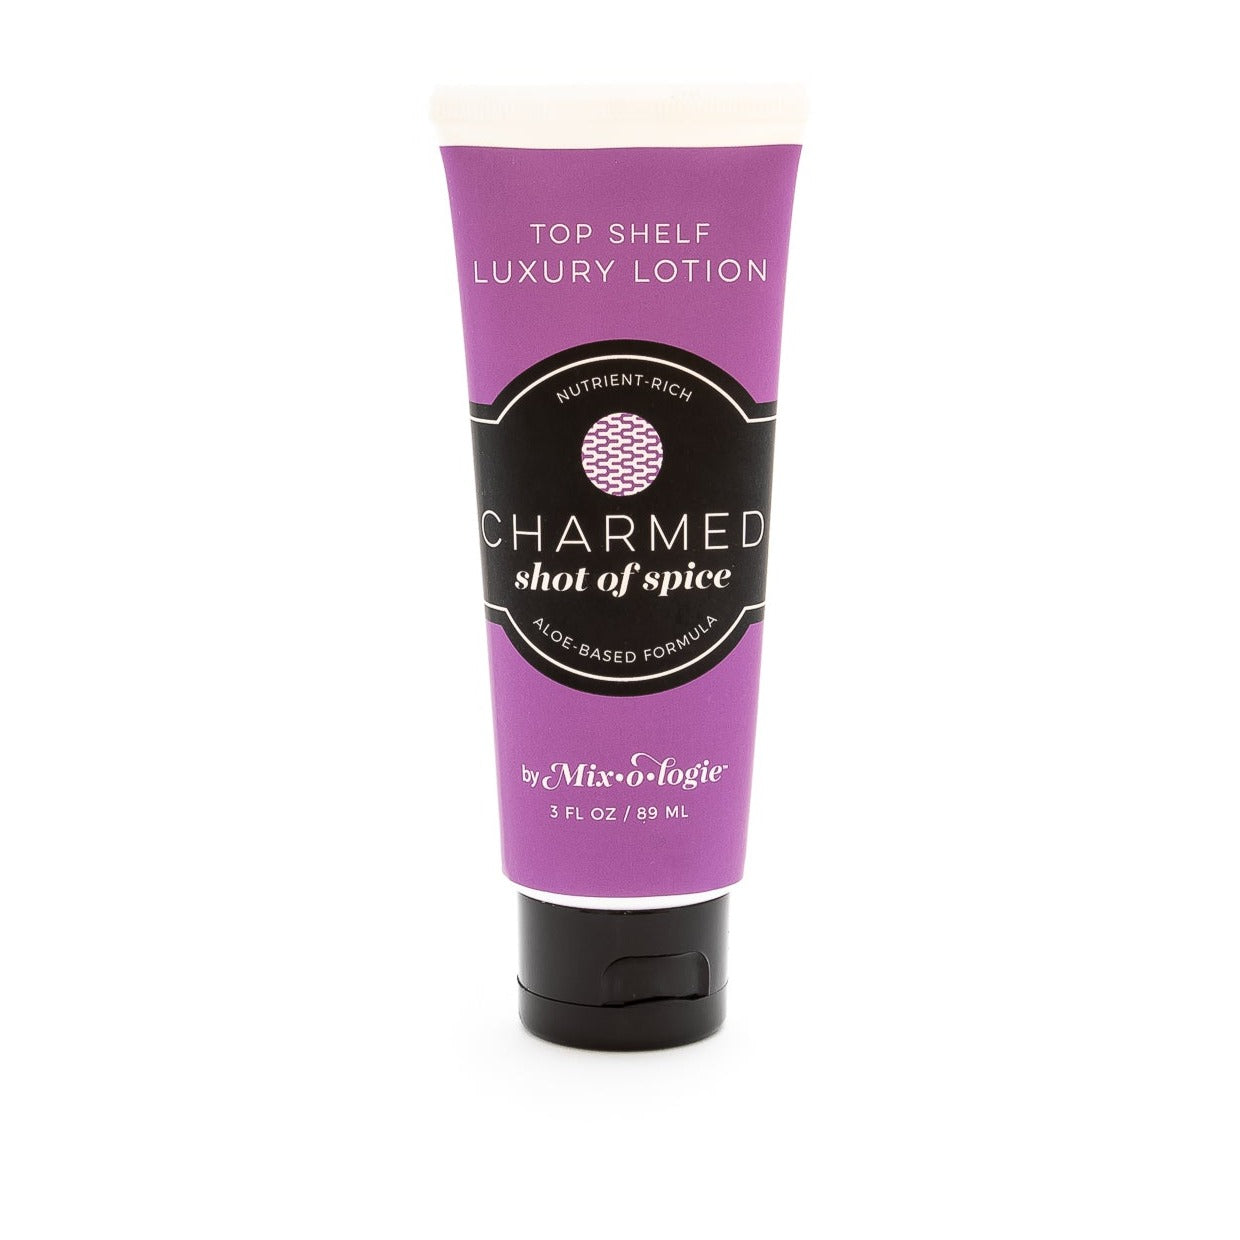 Charmed (Shot of Spice) Top Shelf Lotion in dark purple tube with black lid and label. Nutrient rich, aloe-based formula, tube has 5 fl oz or 89 mL. Pictured with white background